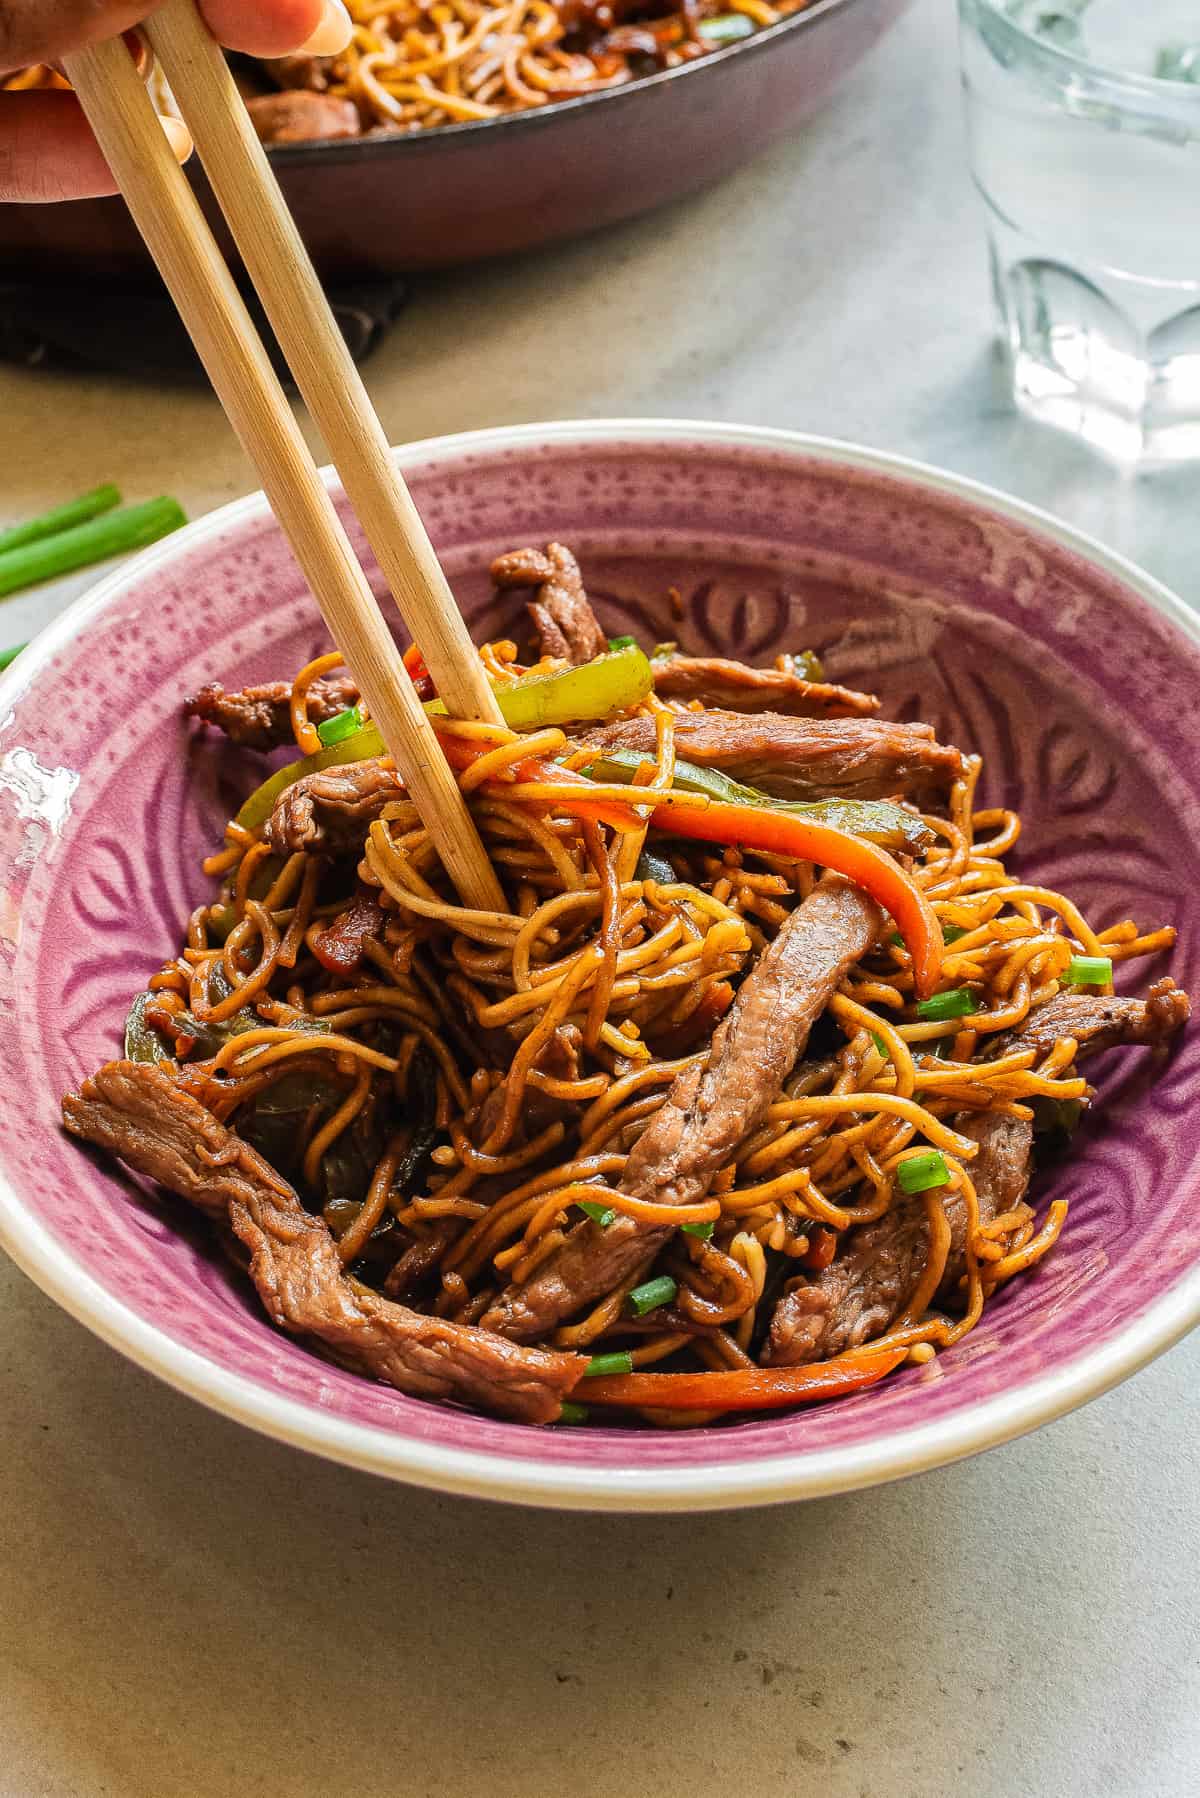 A bowl of stir-fry noodles with beef and sliced vegetables, being eaten with chopsticks. The noodles appear savory and are garnished with green onions, served in a decorative pink bowl. This dish